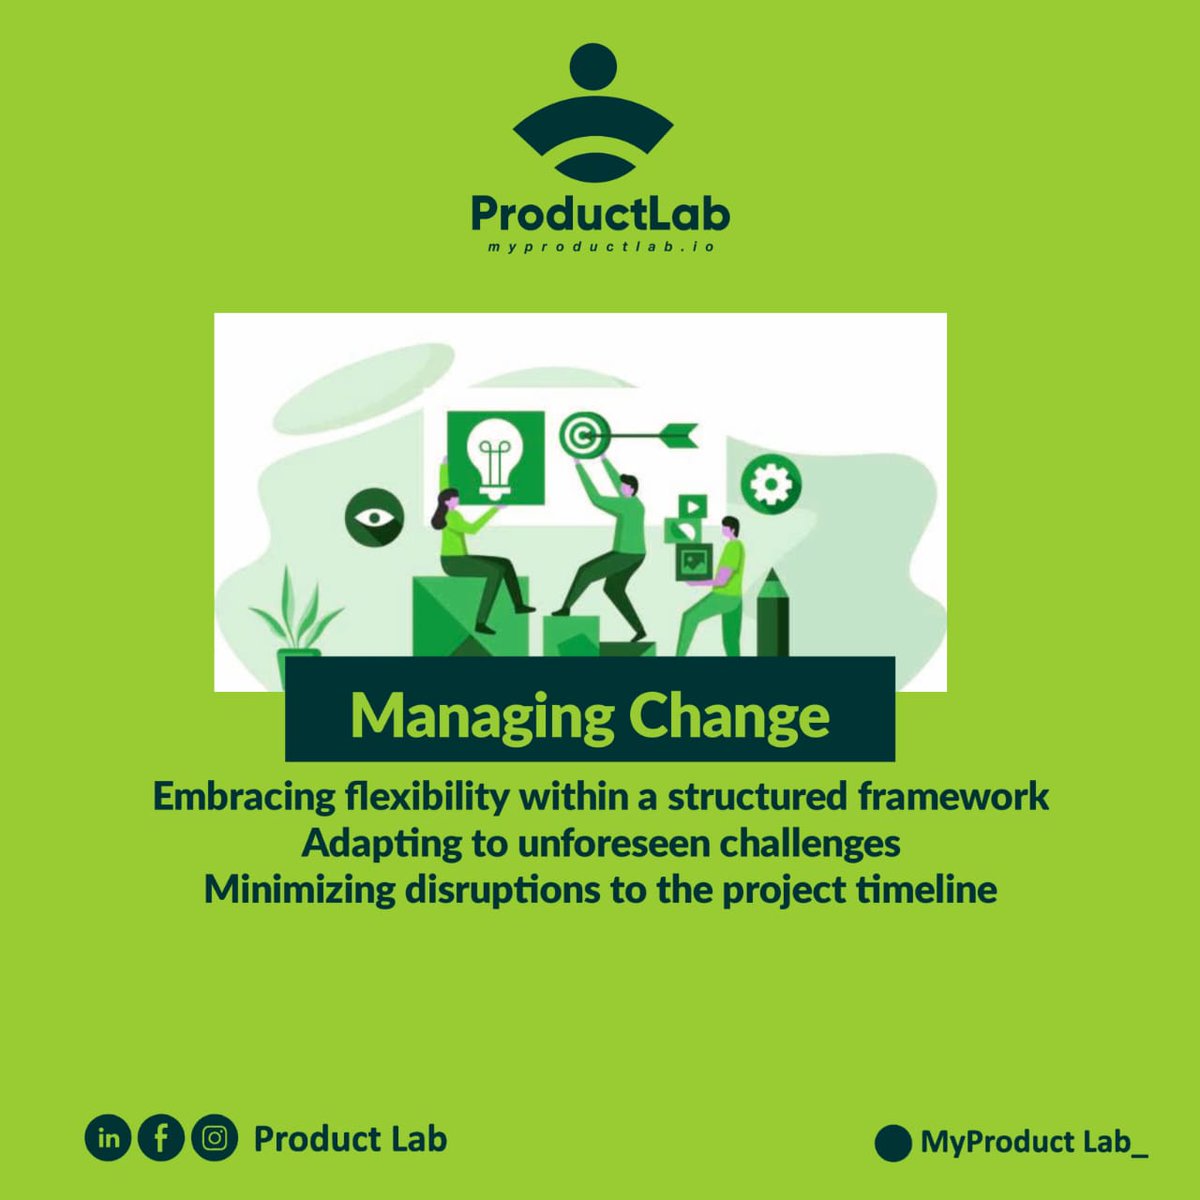 We are back on this! Some of the best skills a tech entrepreneur can ever have are adaptability and flexibility to change, the ability to foresee or identify potential risks early, and having a good quality of your product.

#ProductLab #techentrepreneur